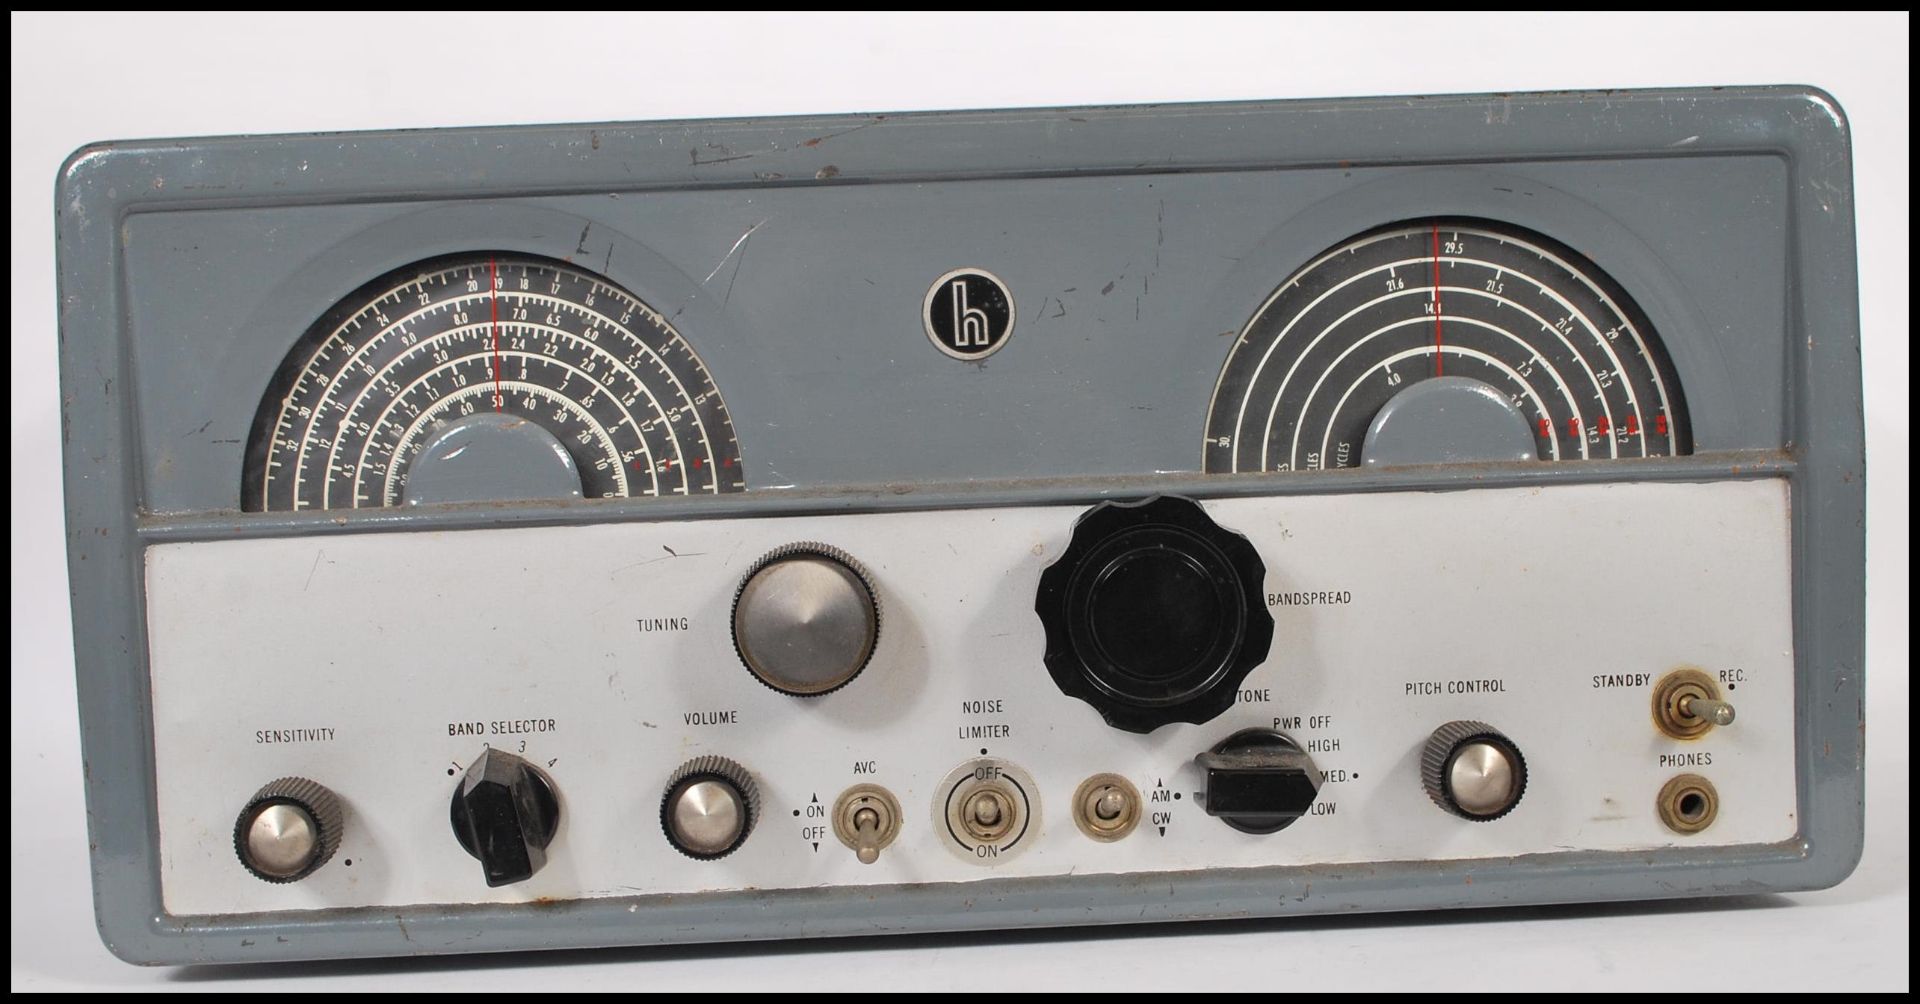 A 20th Century American vintage communications radio receiver by The Hallicrafters co Chicago, model